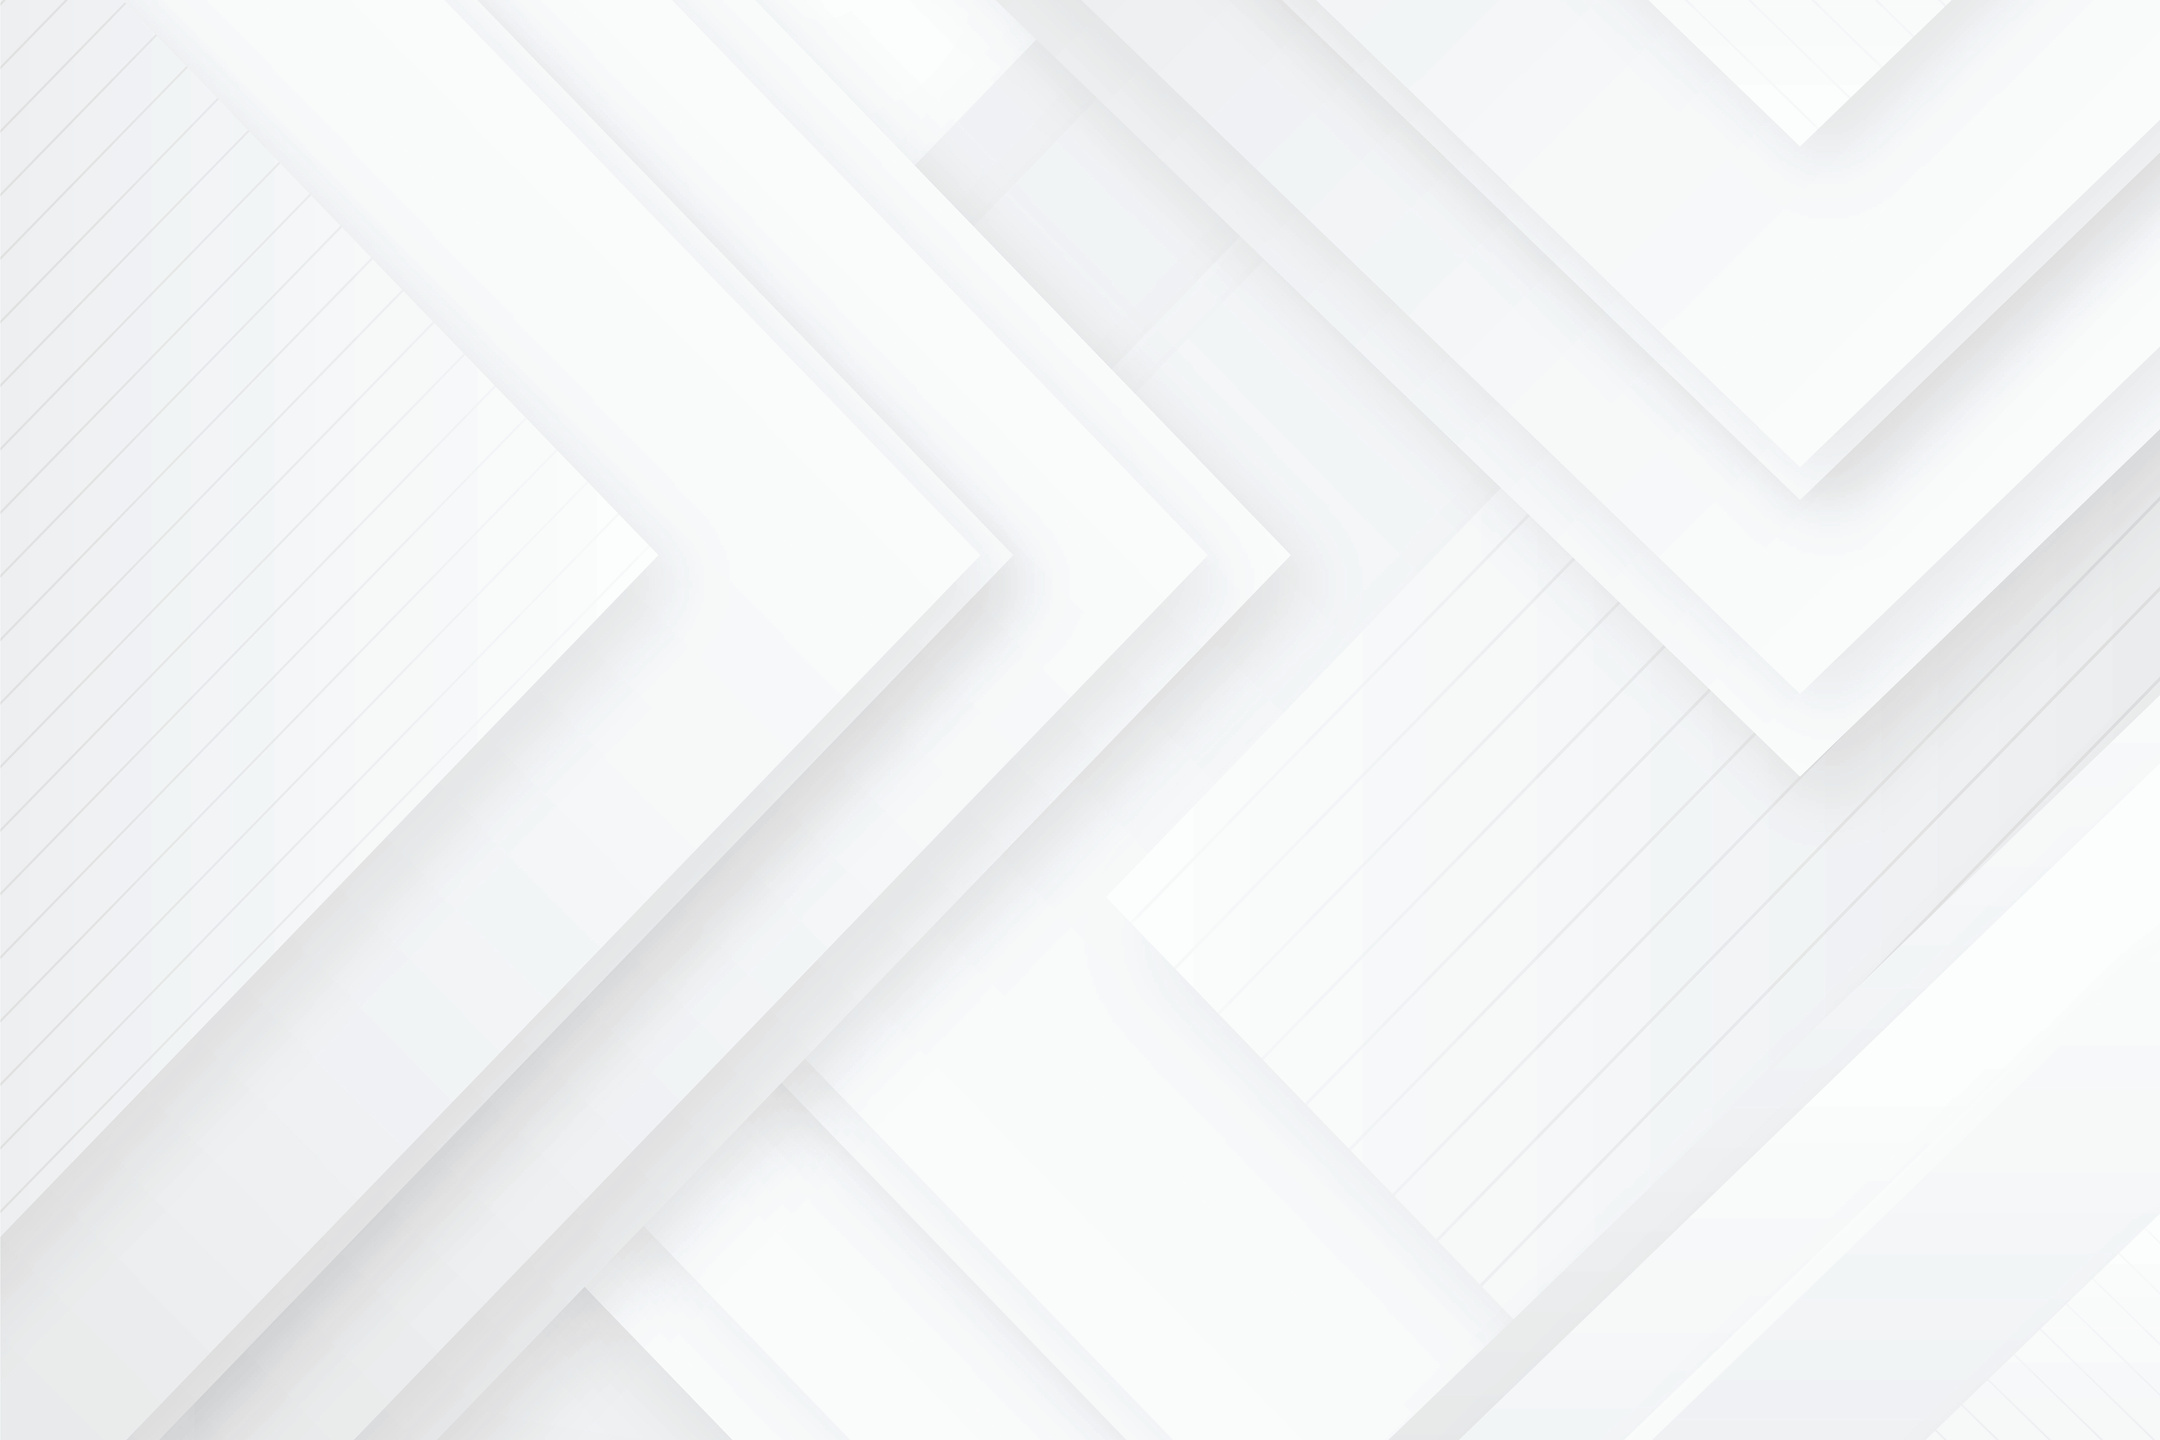 3D White Abstracts Background Stock Photo